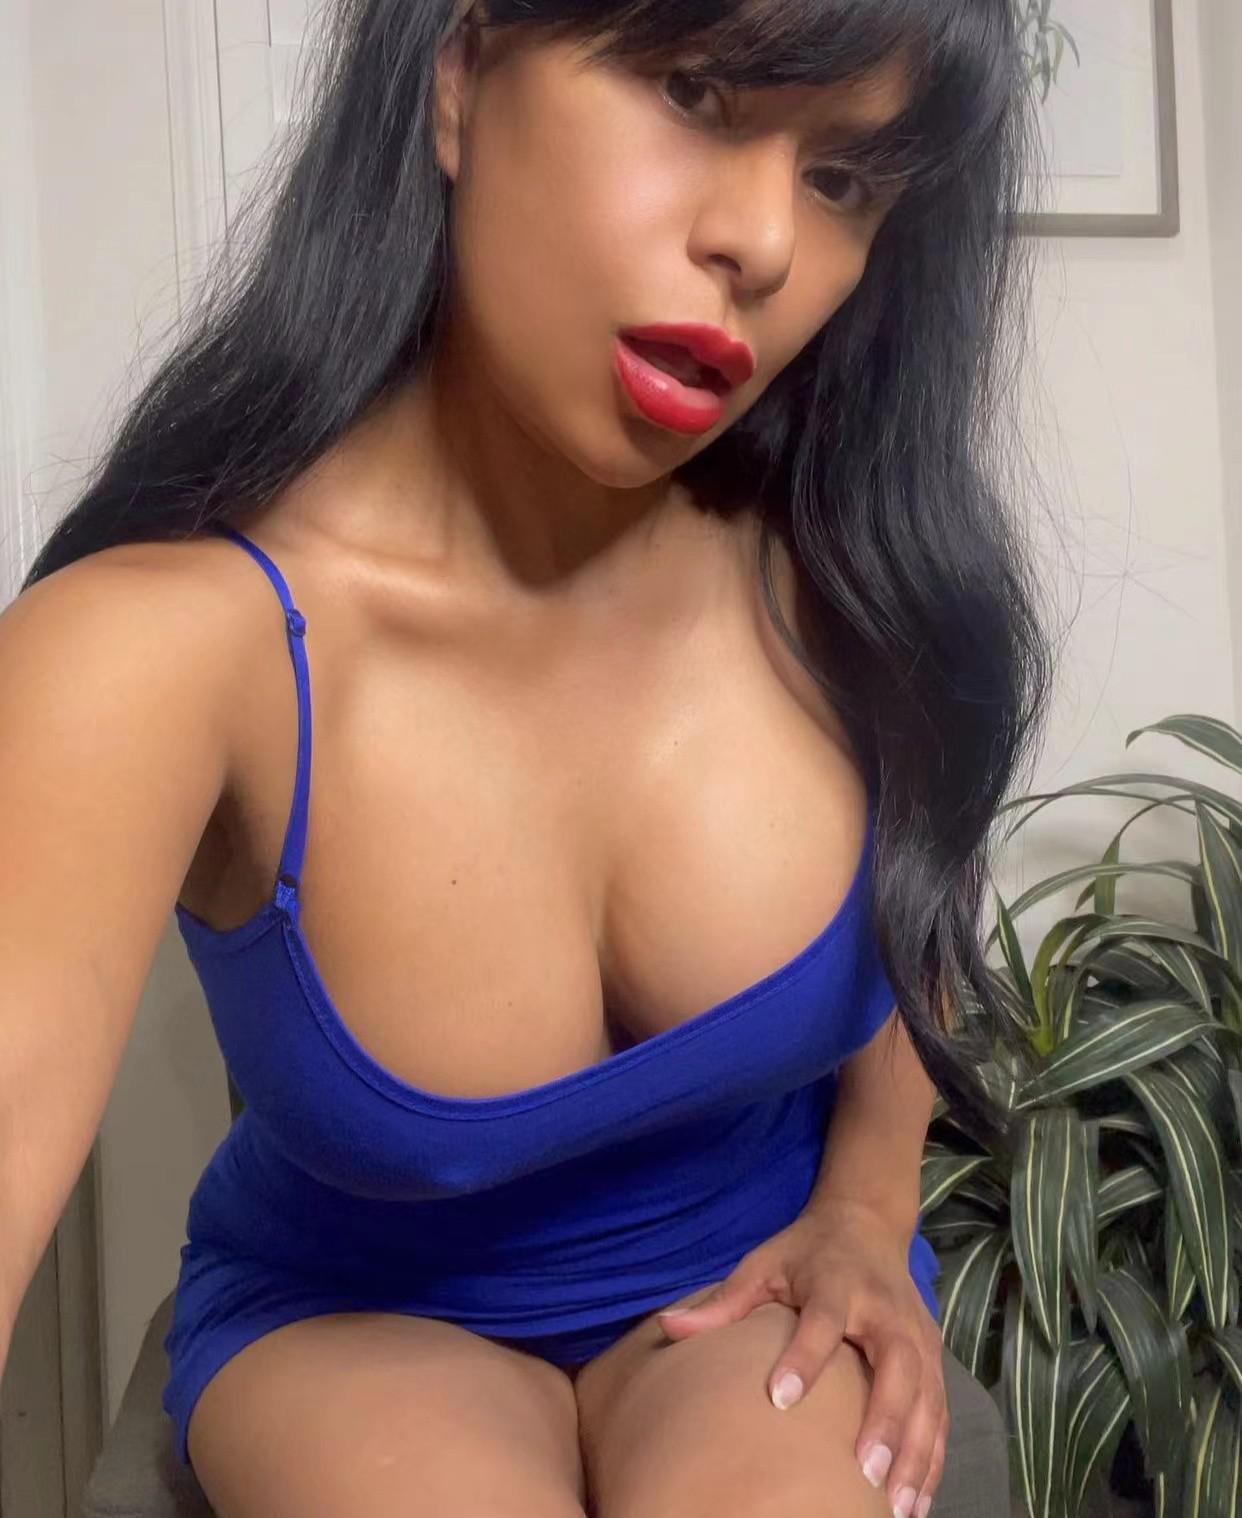 💋 NEW IN OTTAWA DONT MISS OUT SEXY CURVES 🍑🍆INOUT🍆🍑